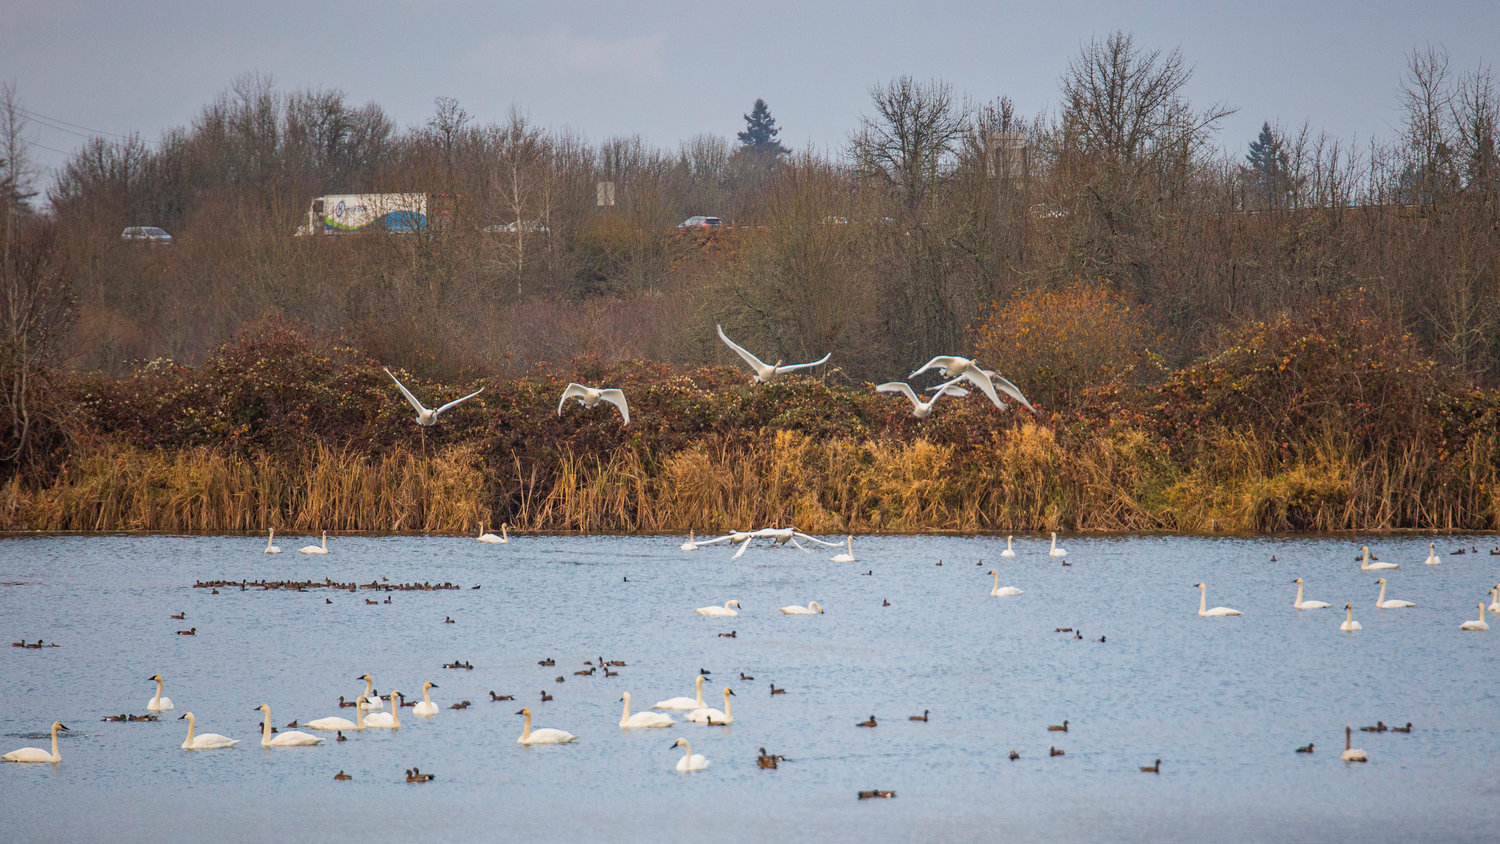 Trumpeter swans take flight over a pond at the trailhead of the Willapa Hills Trail in Chehalis on Saturday afternoon as Thanksgiving traffic travels up Interstate 5 in the background.